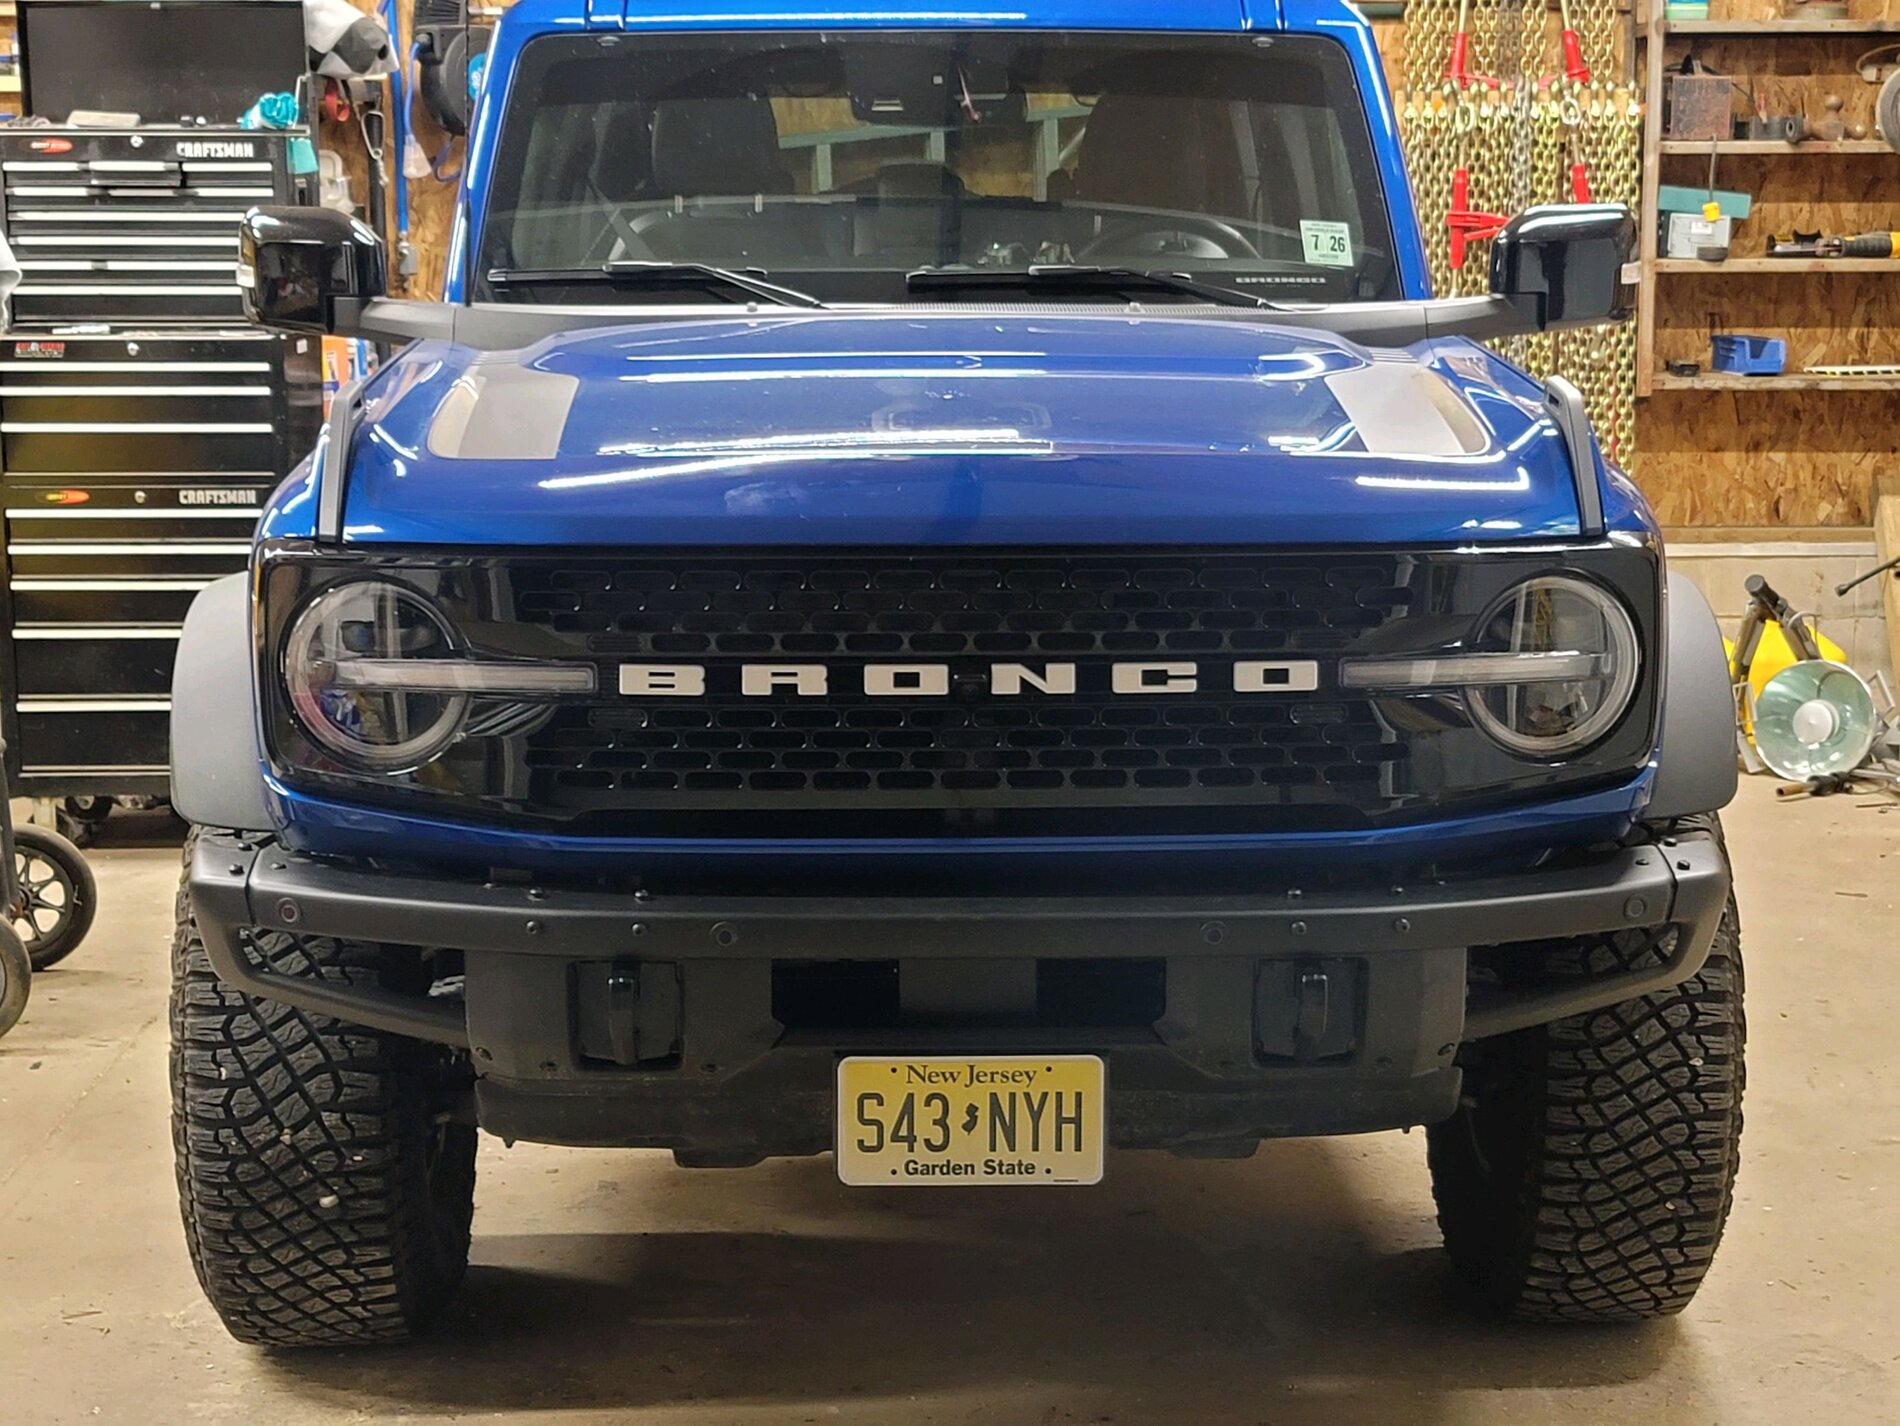 Ford Bronco Updated - Need some help with a front license plate bracket solution 072d7685-43c7-4aff-8087-cd4fa56e5d0d-jpe